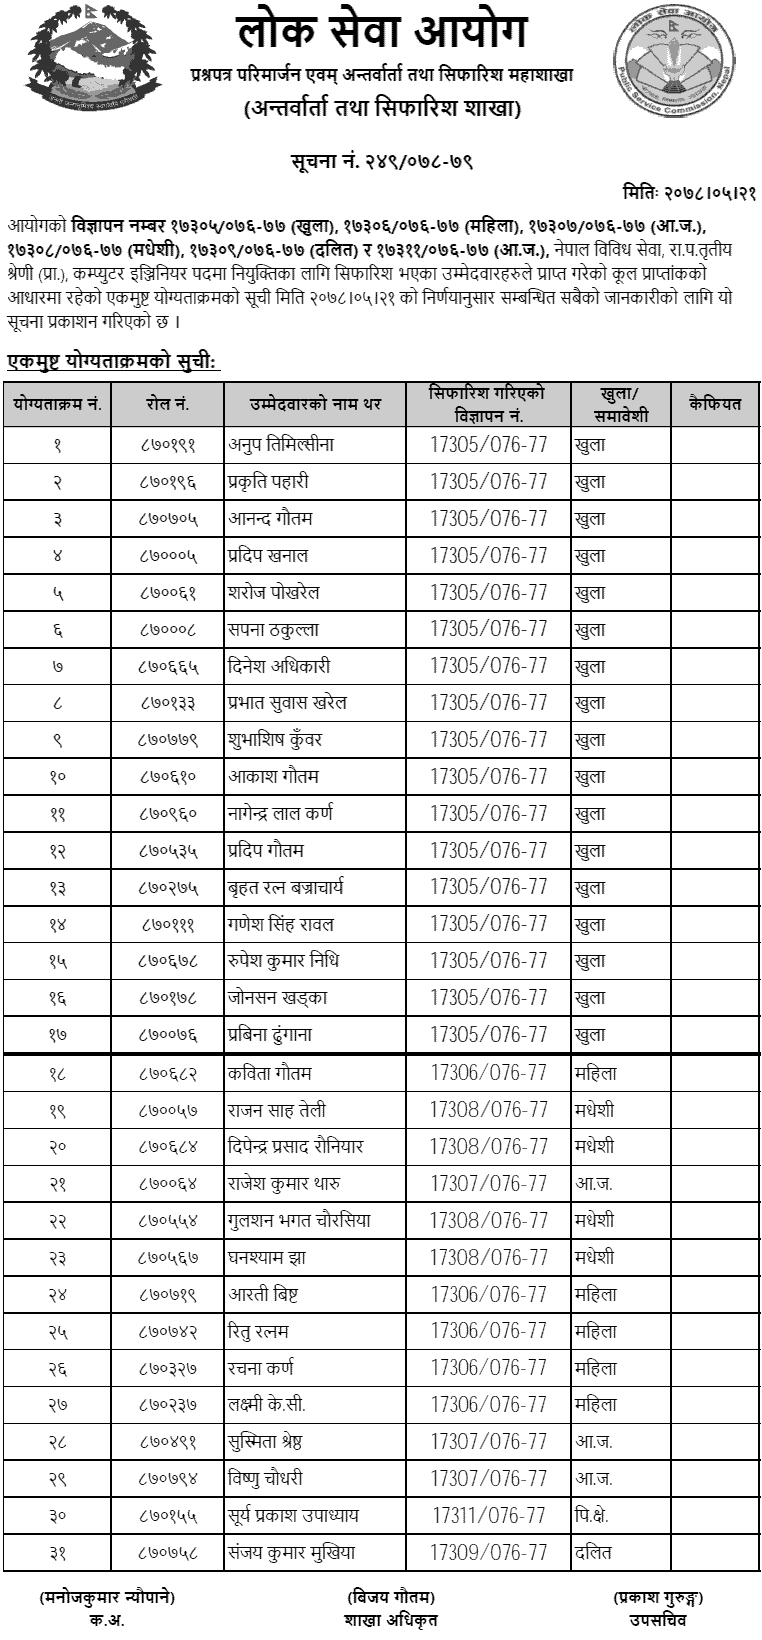 Lok Sewa Aayog Final Result and Recommendation of Computer Engineer